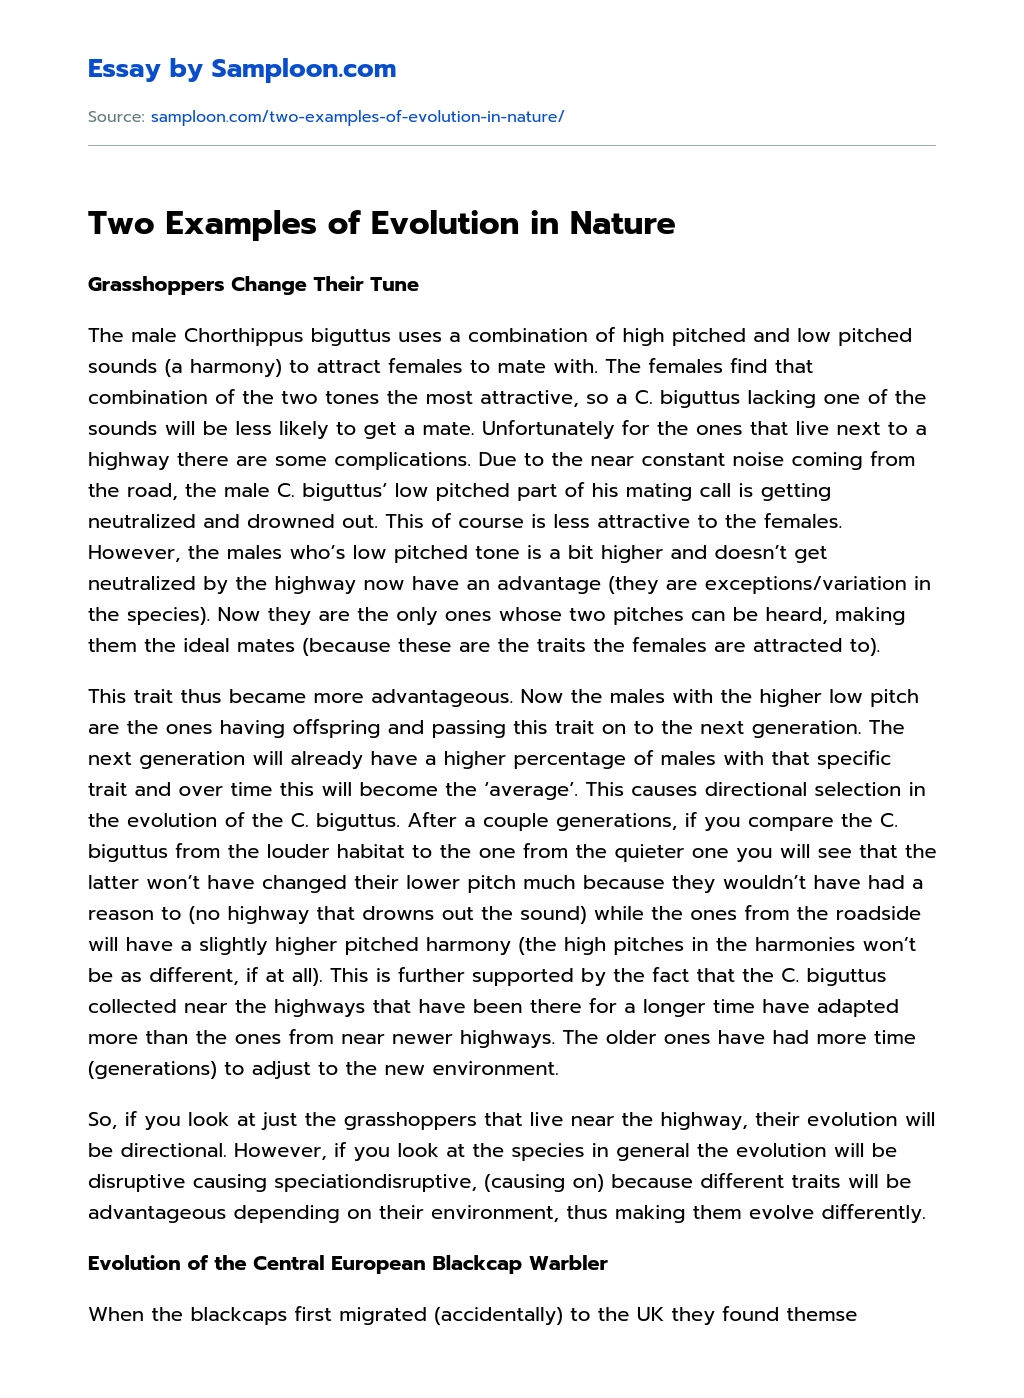 Two Examples of Evolution in Nature essay